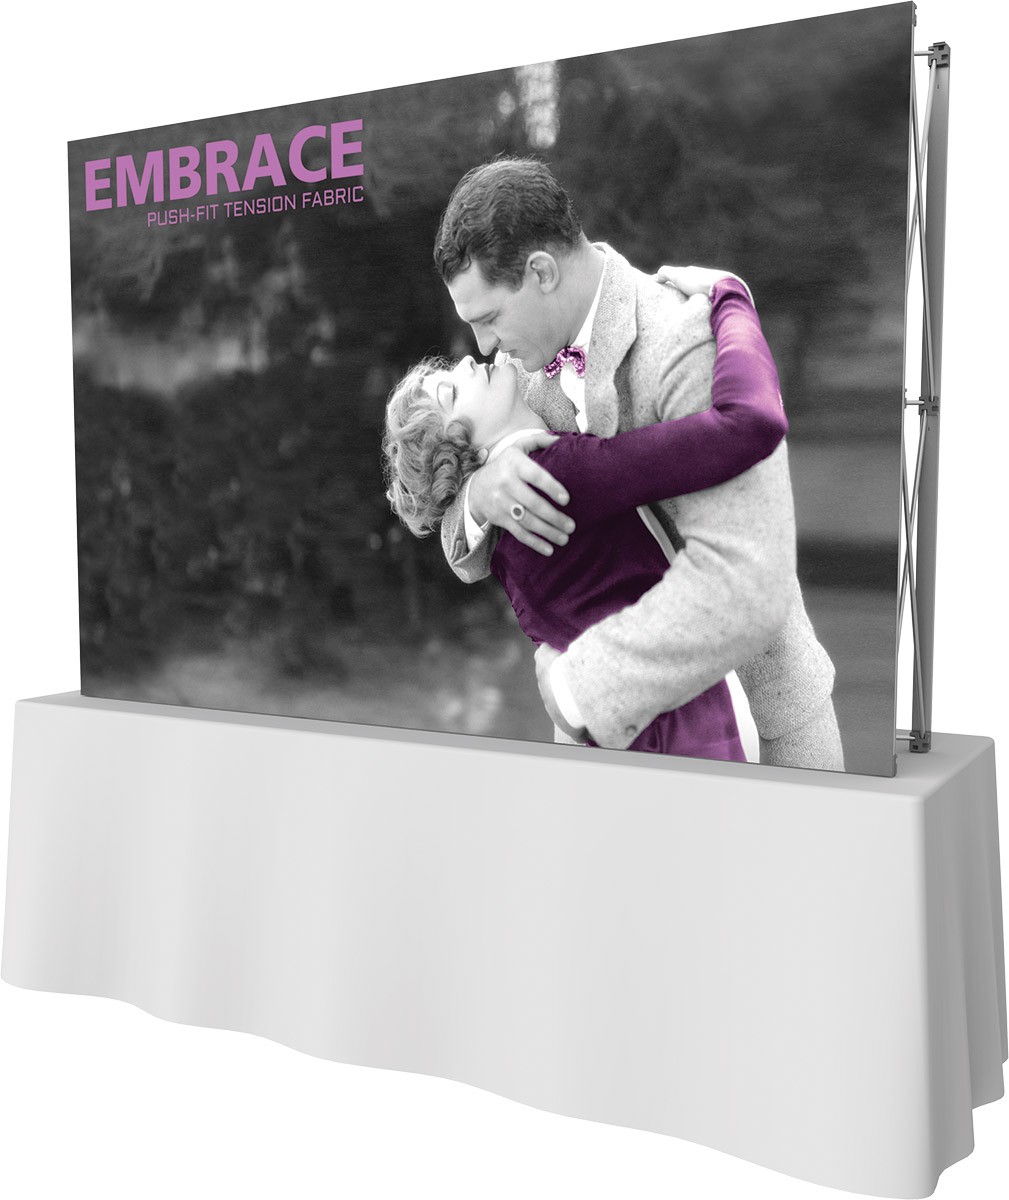 Embrace 8' x 5' Table Top Display